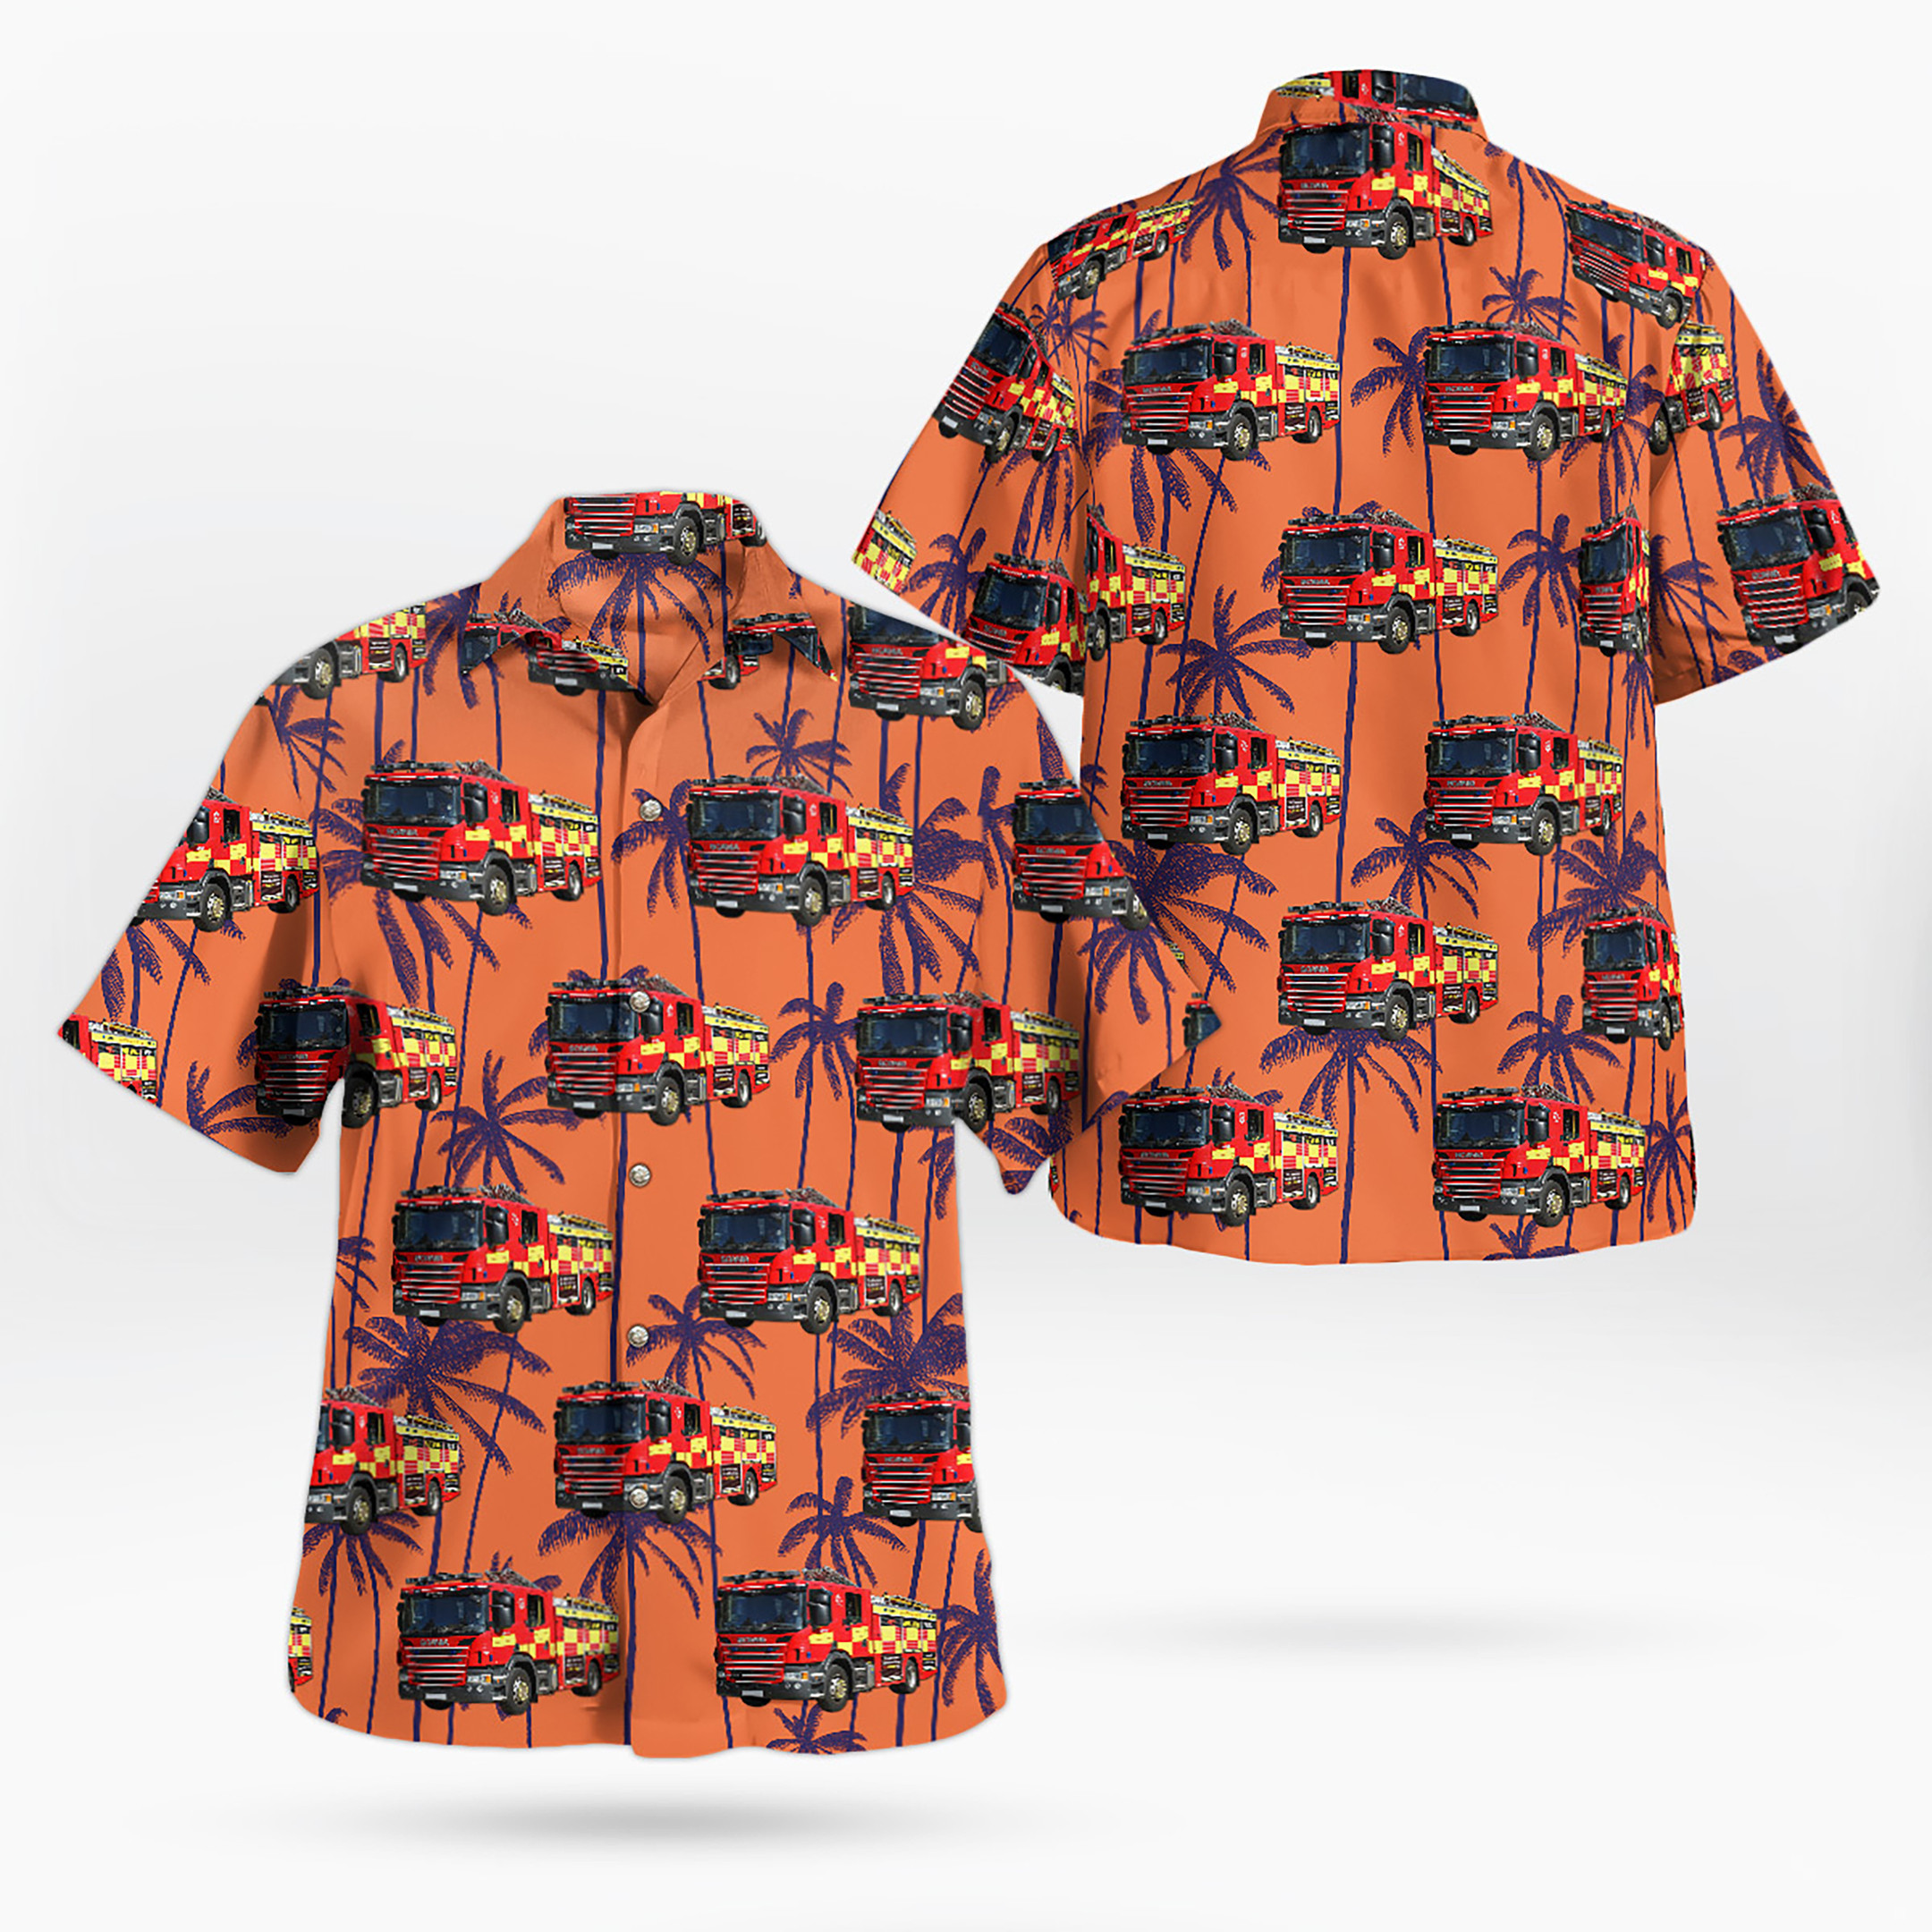 If you are in need of a new summertime look, pick up this Hawaiian shirt 208